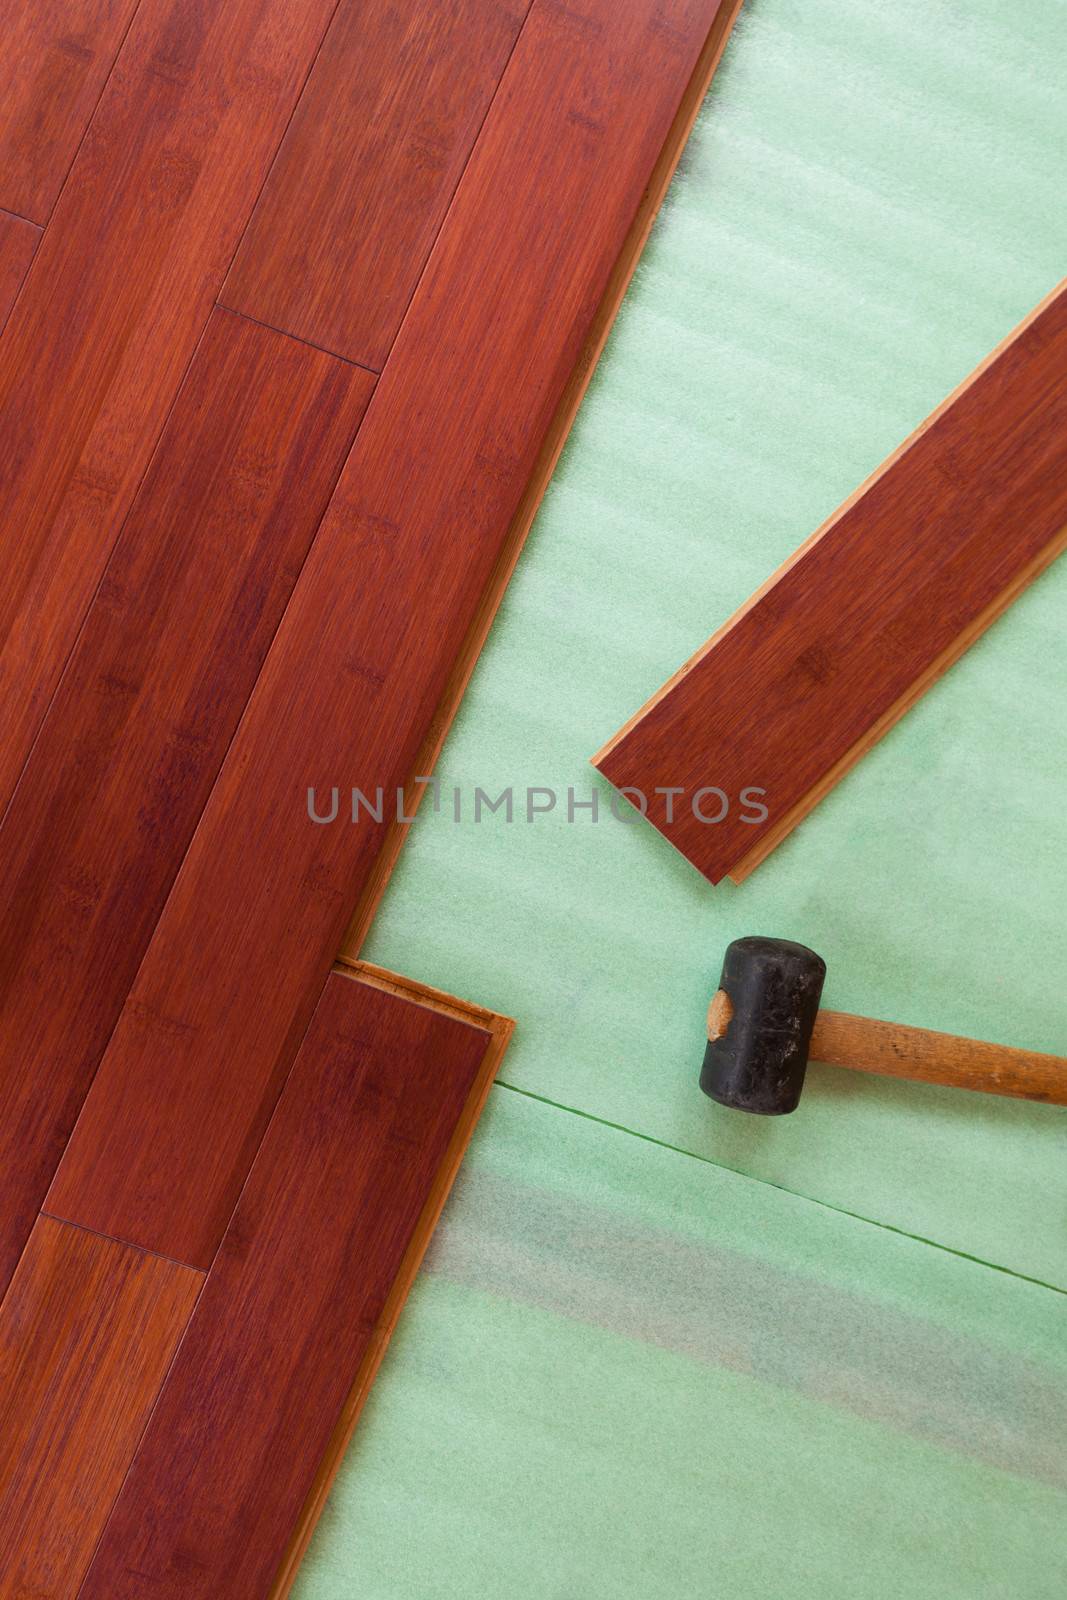 Wooden bamboo hardwood flooring planks being layed by PiLens